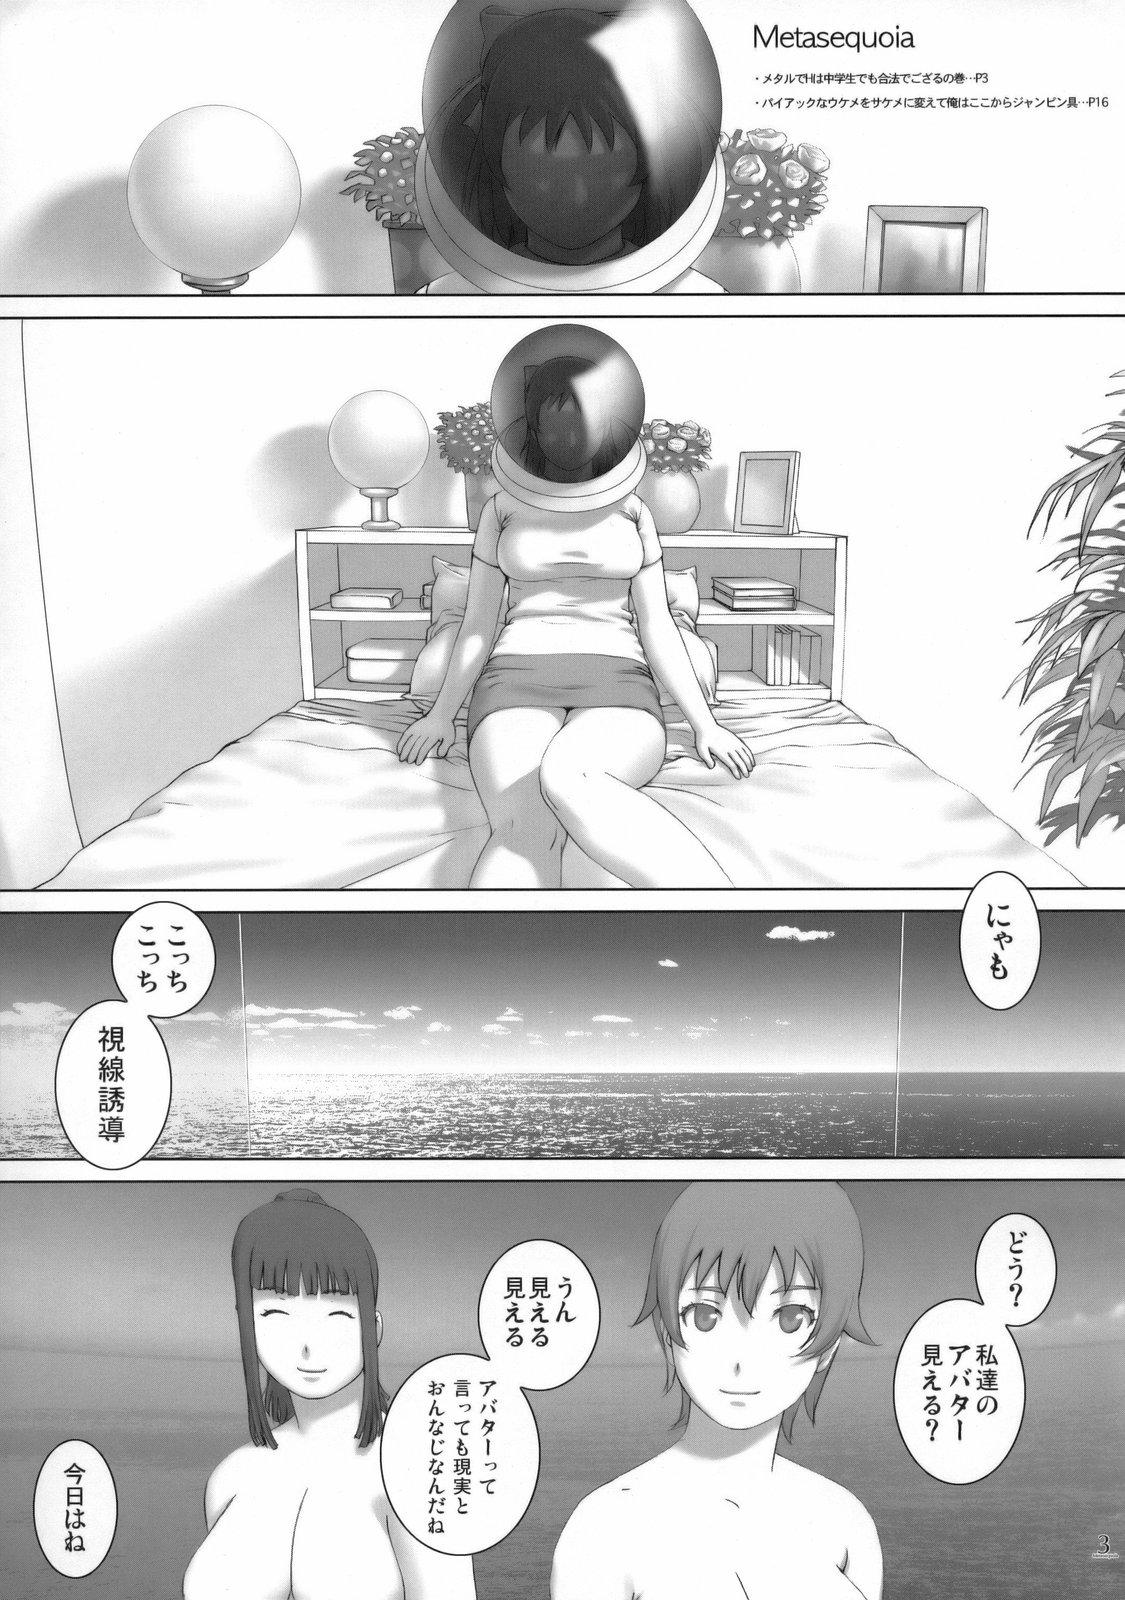 Milf Fuck Metasequoia - Real drive Fuck For Money - Page 2